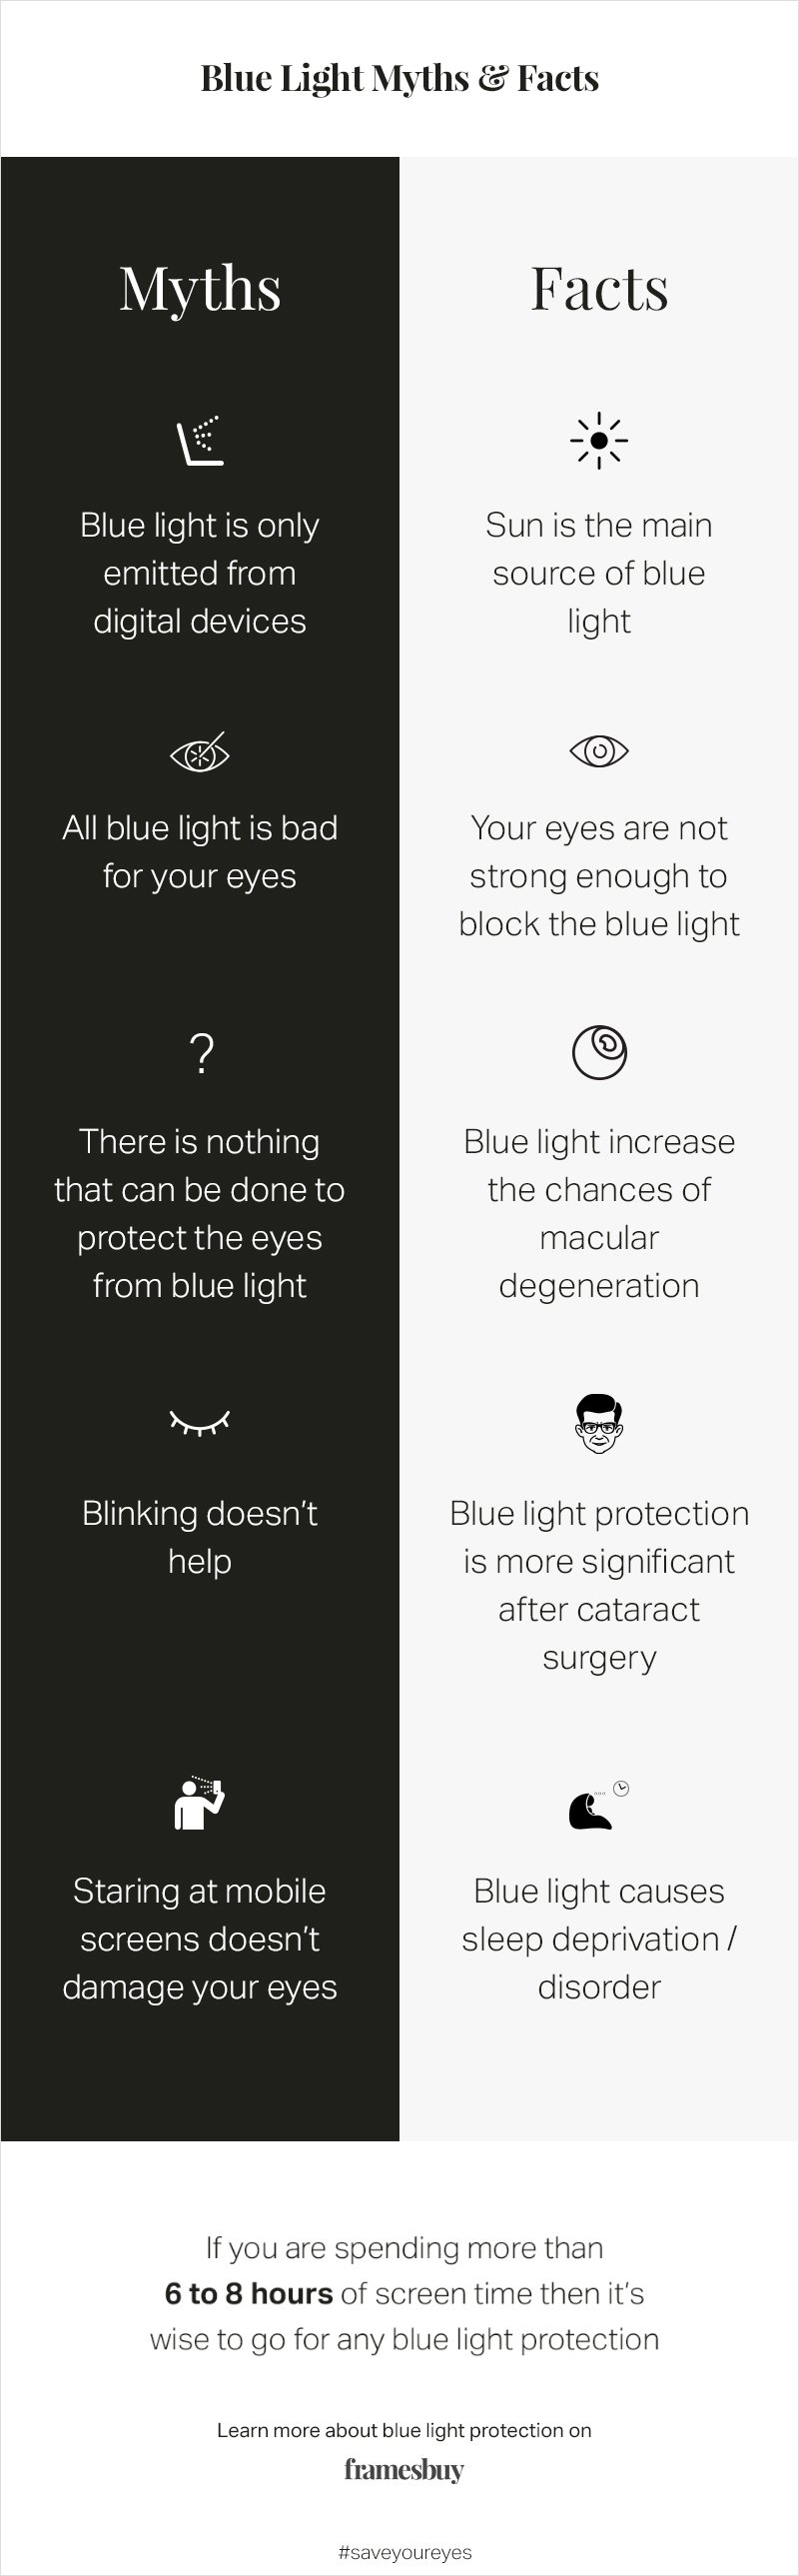 What is Blue Light from Digital Devices?